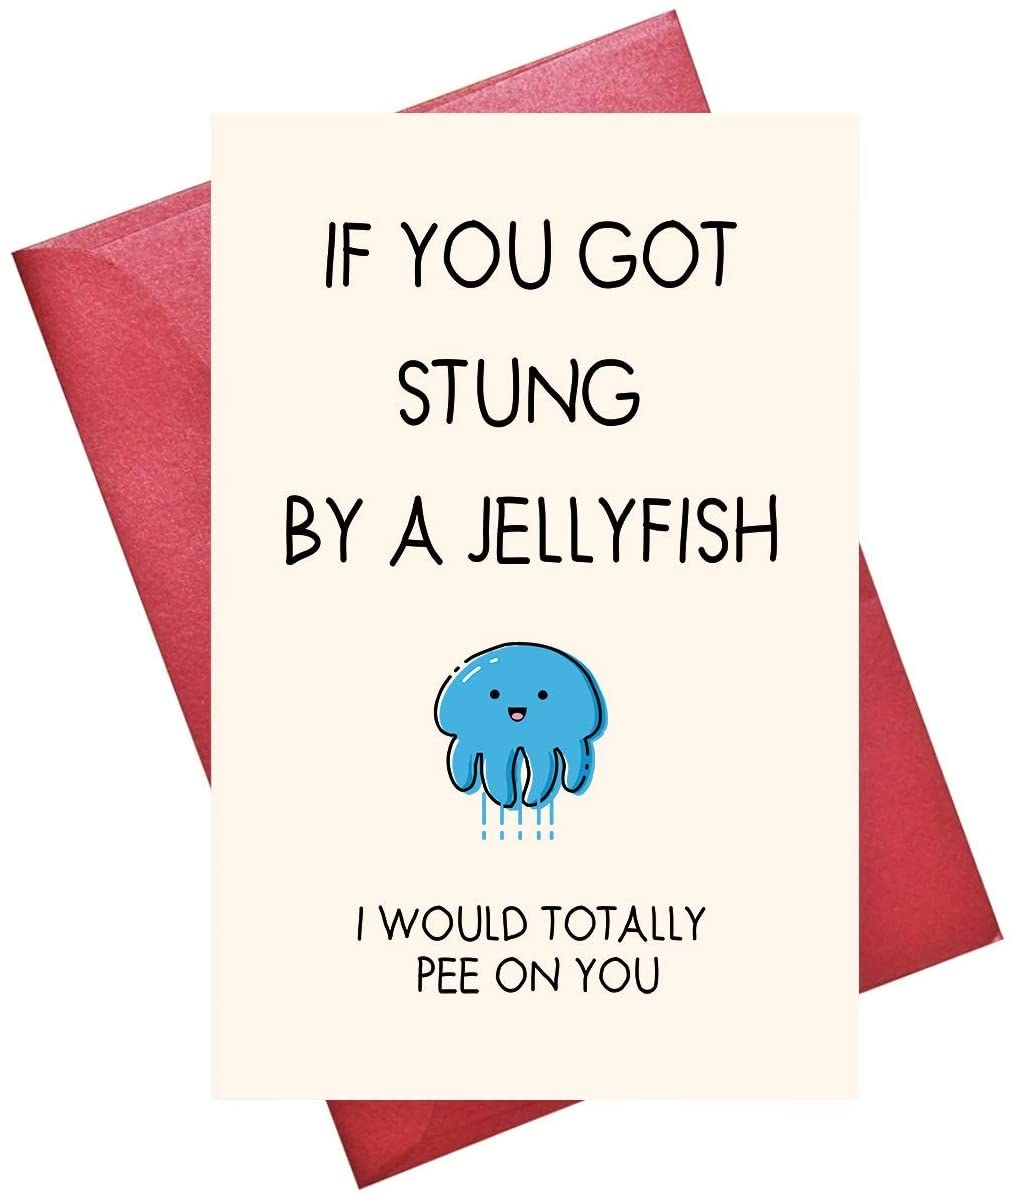 A beige card with a cartoon drawing of a jellyfish, and &quot;If you got stung by a jellyfish, I would totally pee on you&quot; written on it in black